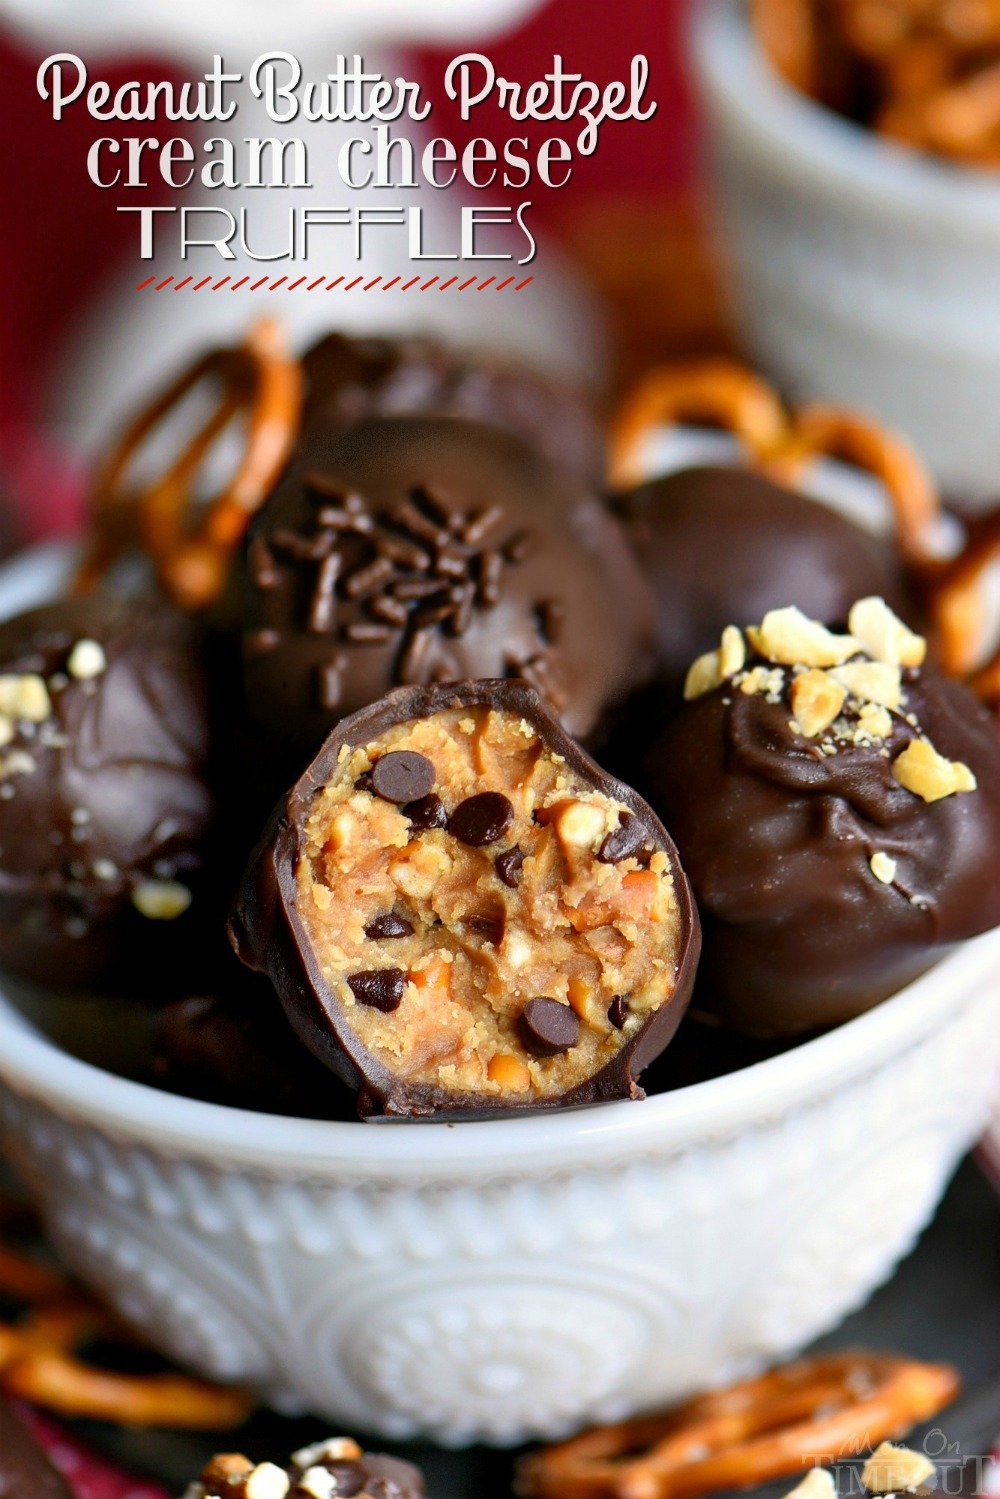 It's not a party without these easy Peanut Butter Pretzel Truffles! Extra creamy and delicious and loaded with peanut butter, chocolate chips, and pretzels! The ultimate sweet and salty combination! // Mom On Timeout #peanutbutter #pretzel #chocolate #candy #truffle #recipe #ad